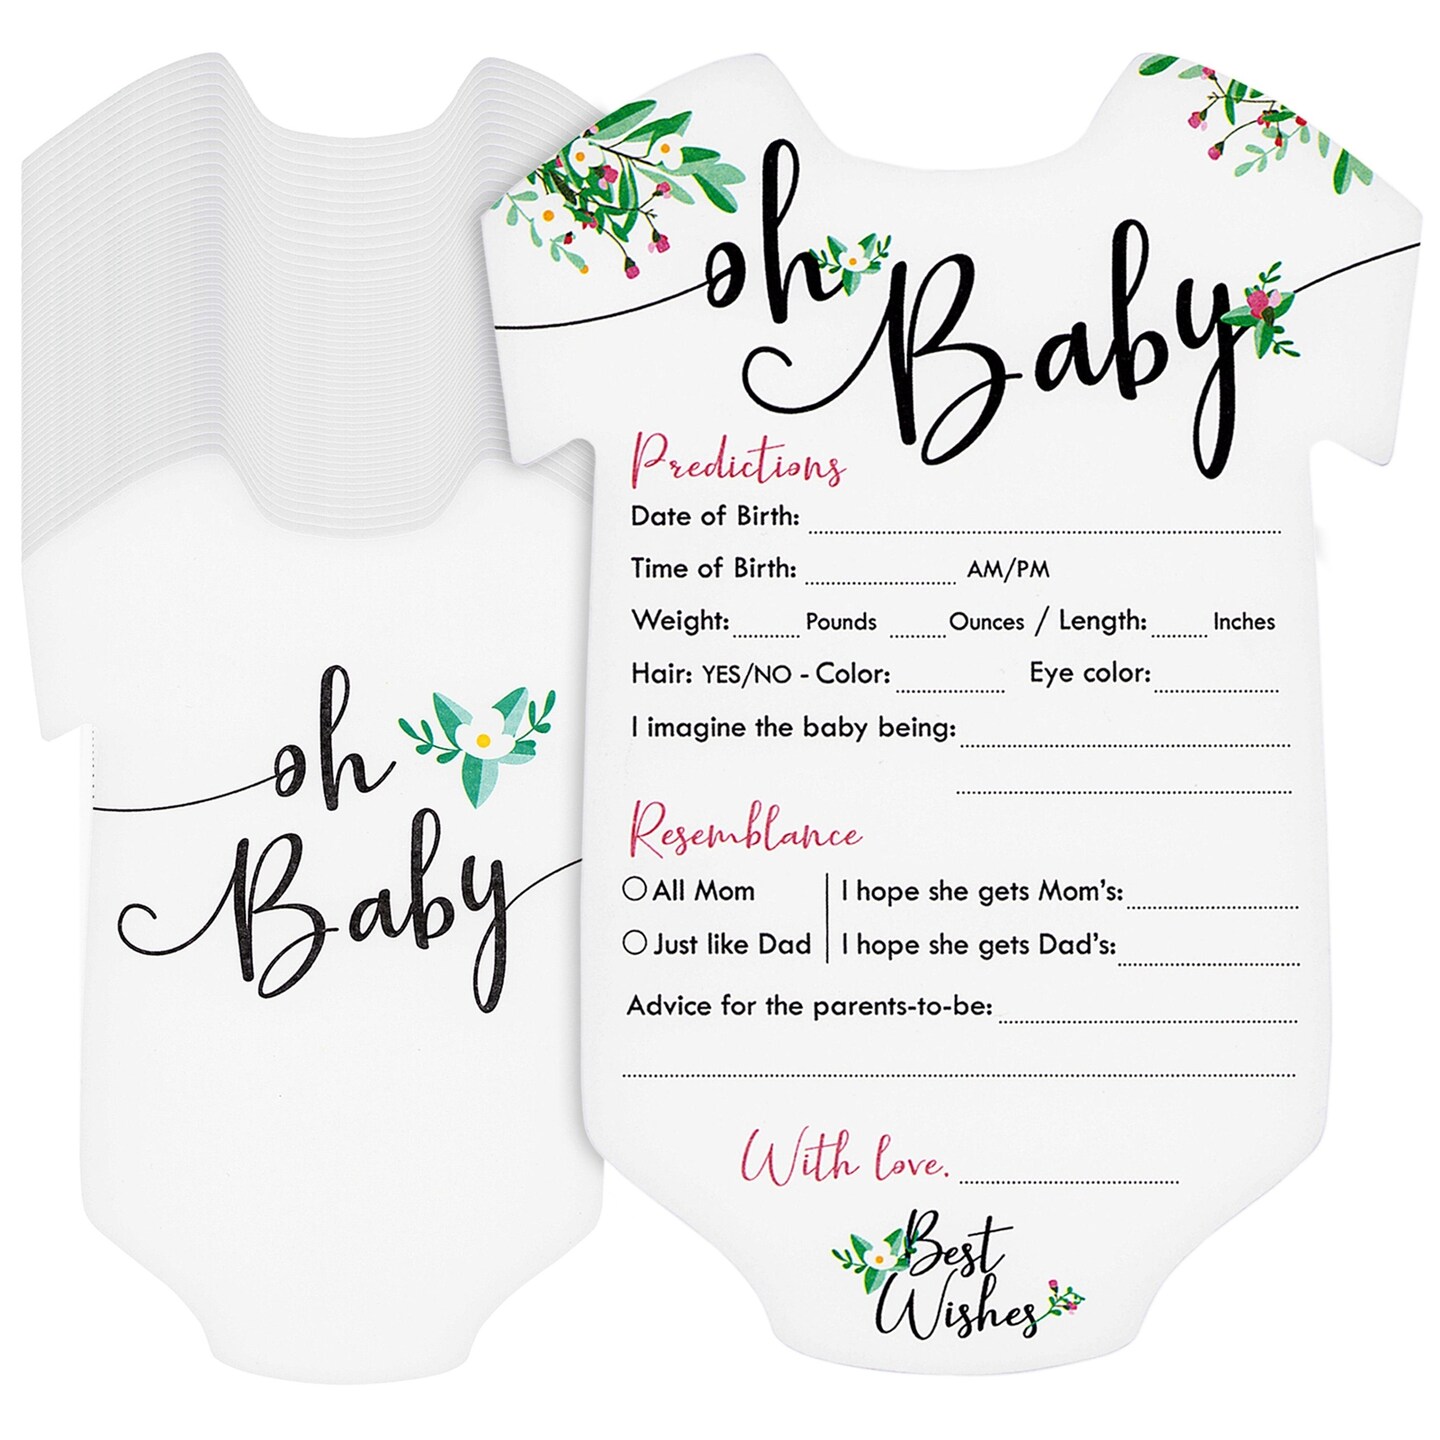 50 Pack Girl Baby Shower Prediction and Advice Cards for Parents to Be, Floral Themed Party Games (5 x 7 In)